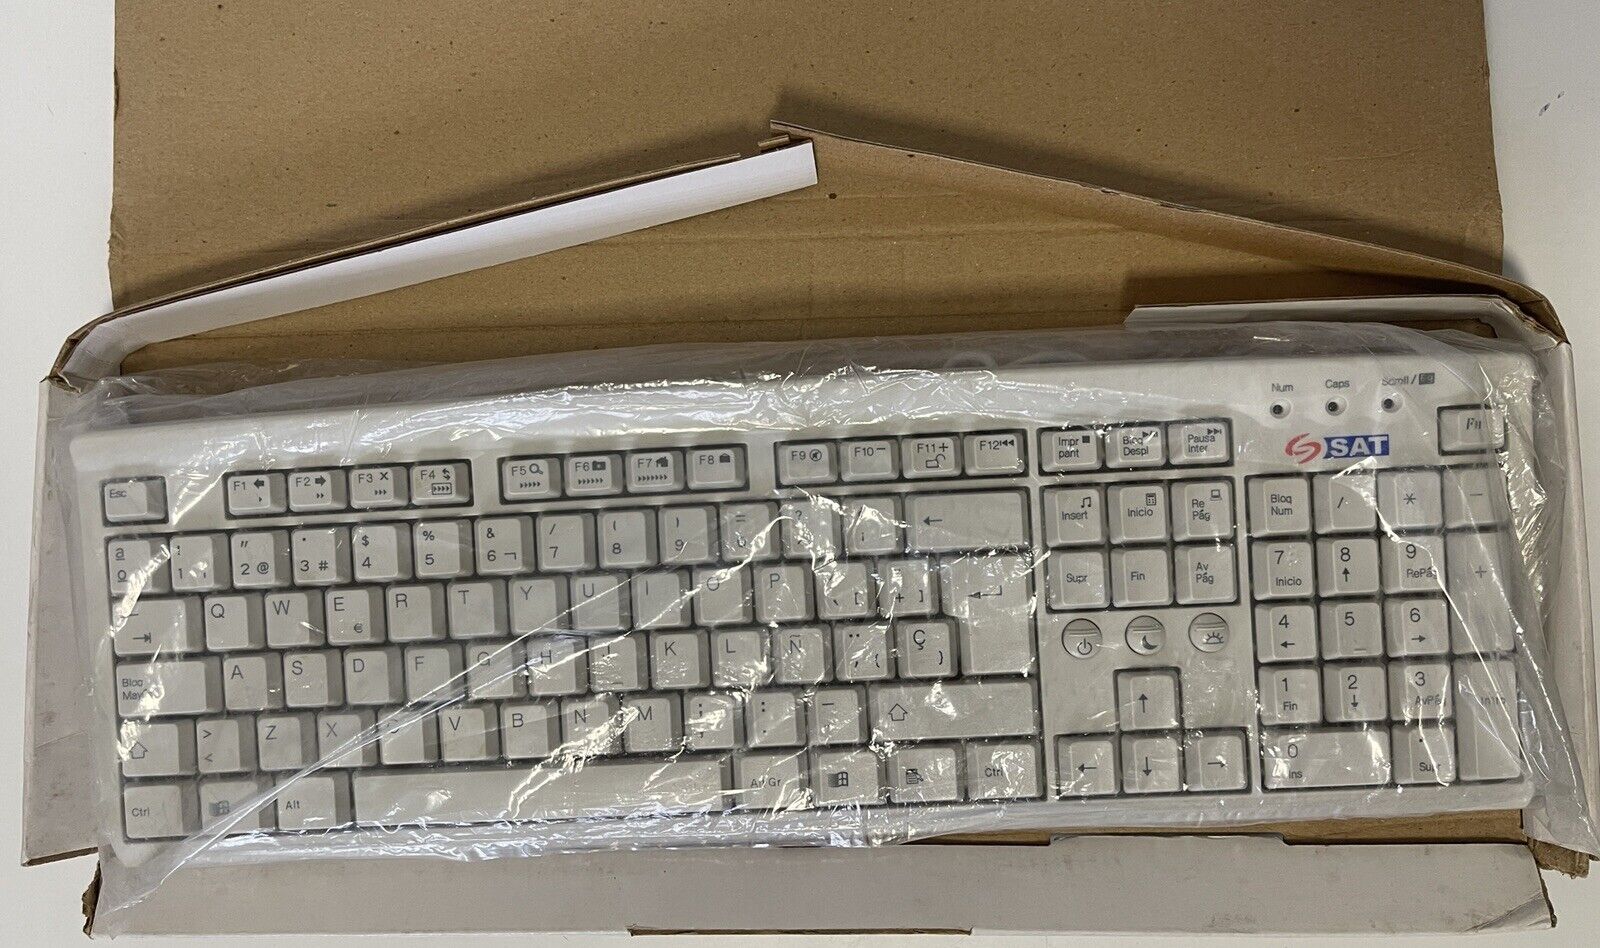 Brand New SAT Spanish PS/2 Beige PC Keyboard. Brand New with Box